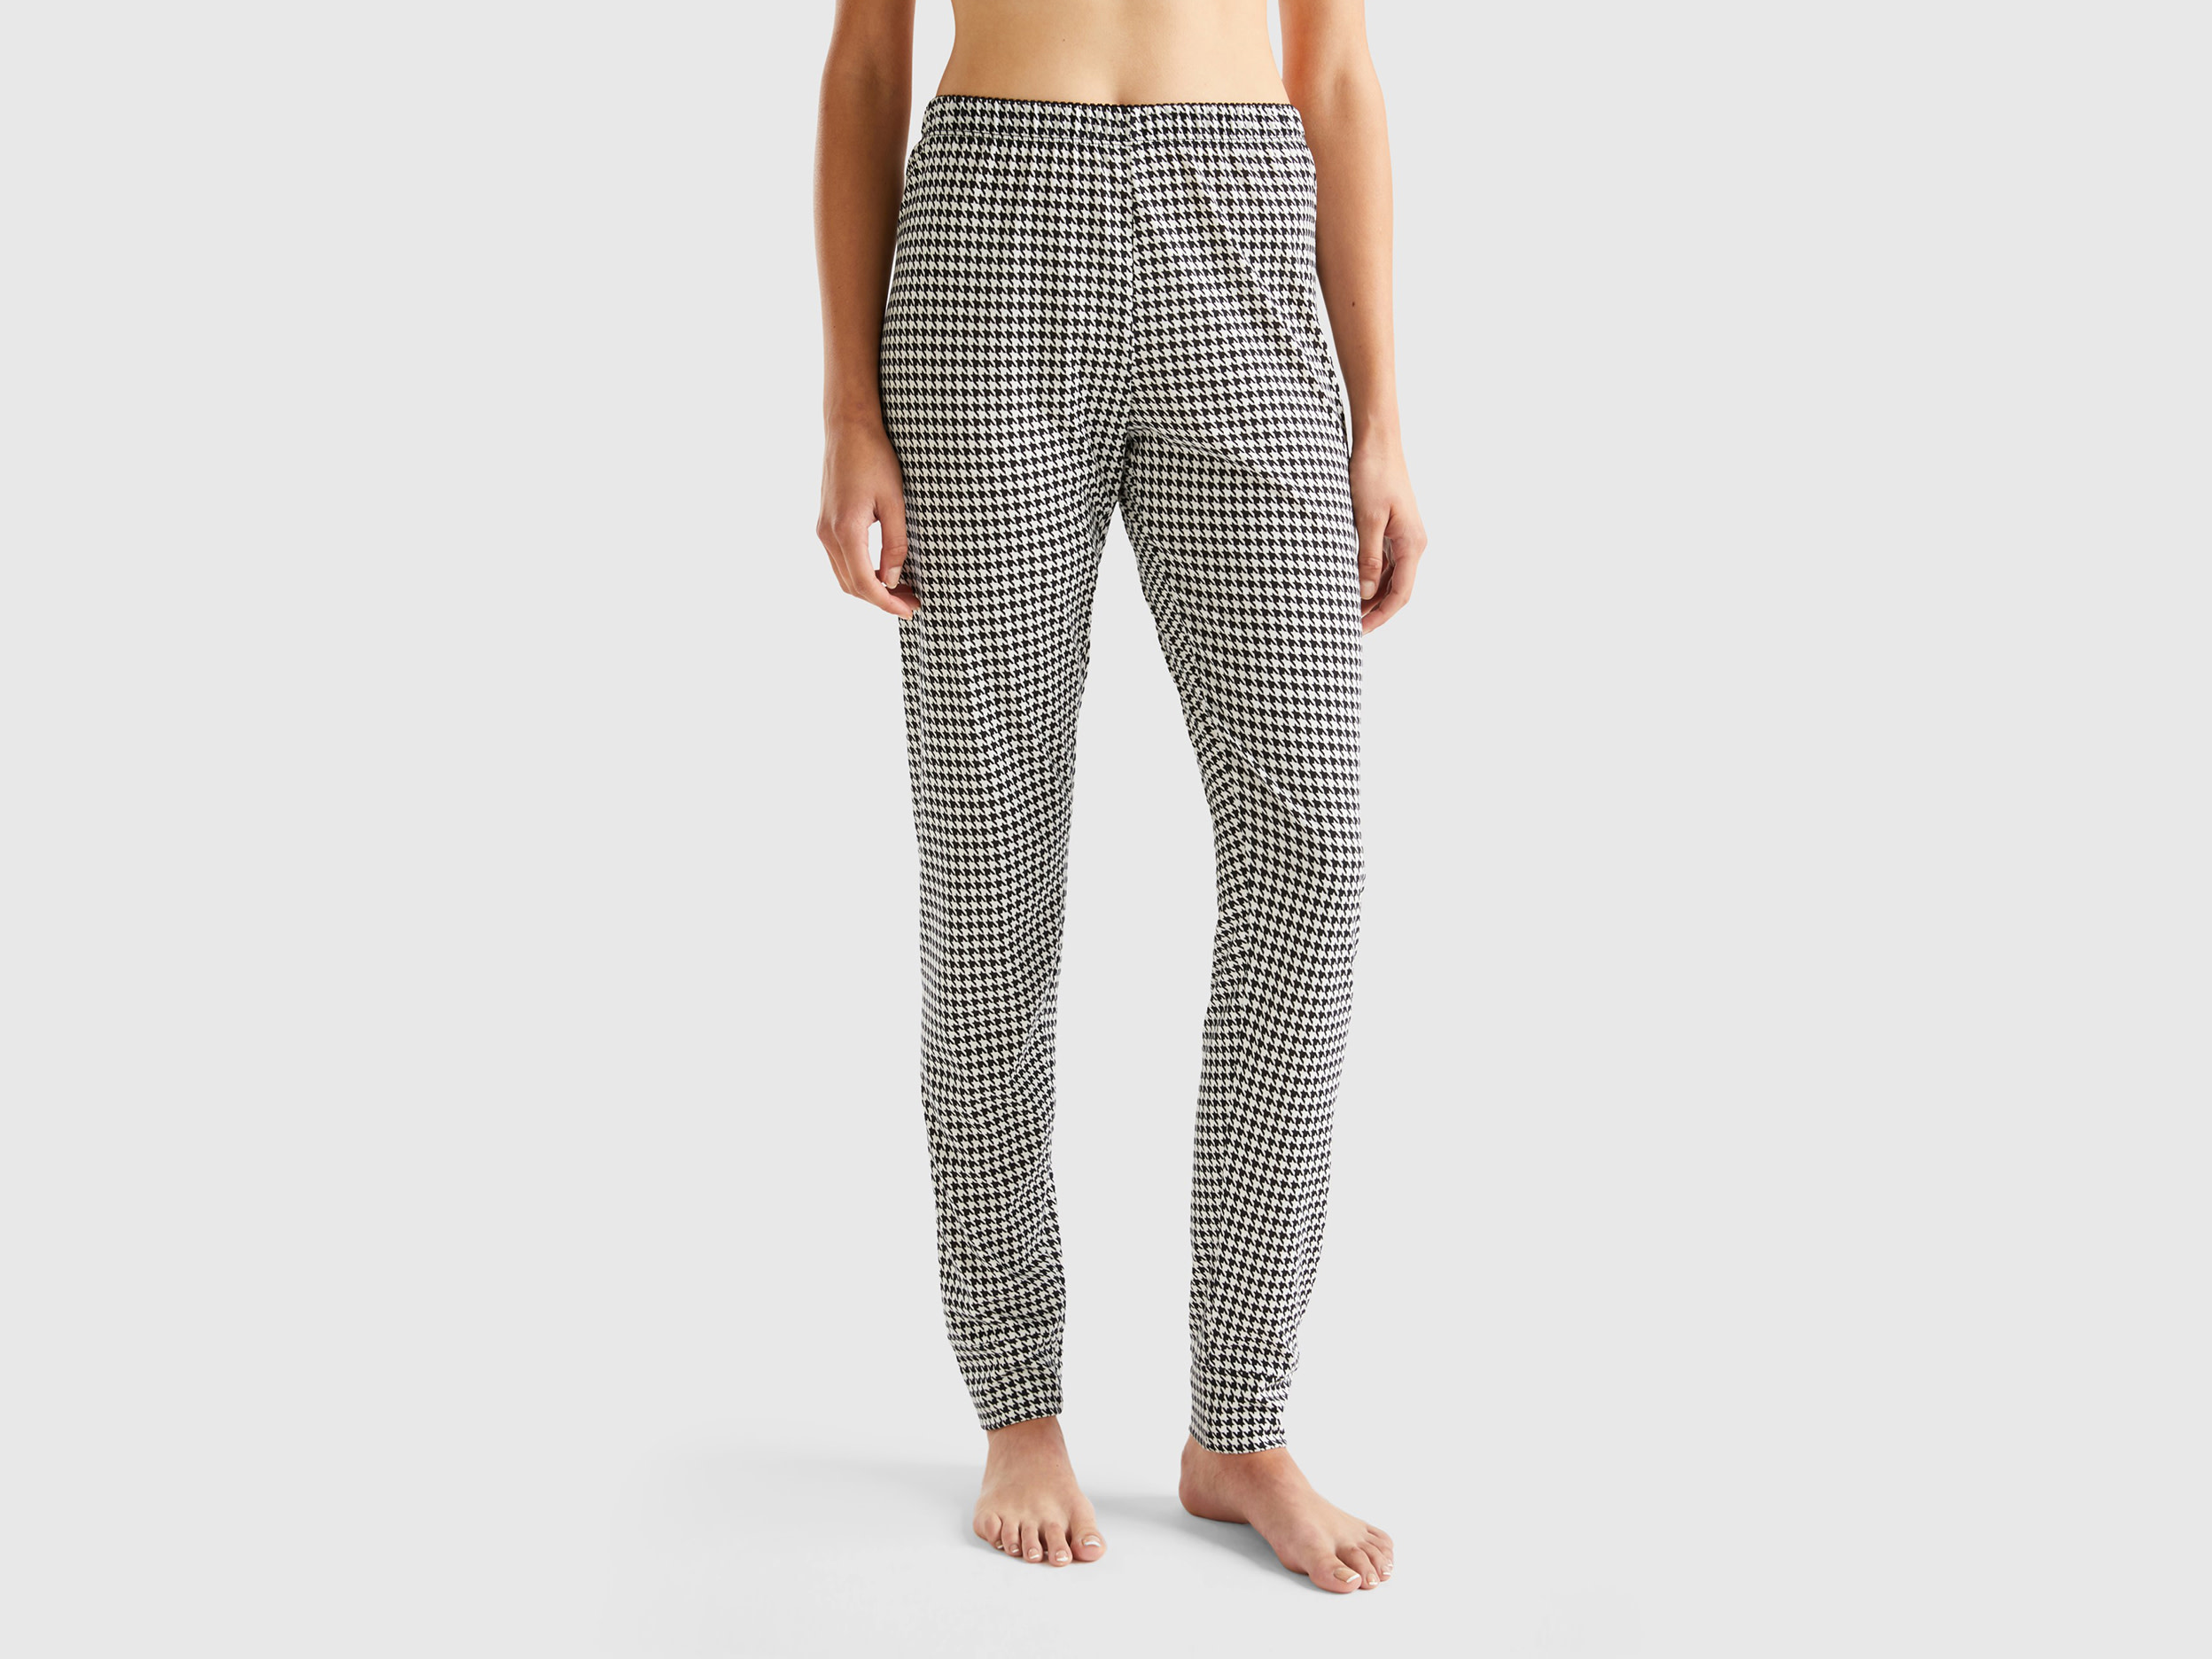 Benetton, Houndstooth Trousers, size S, Multi-color, Women